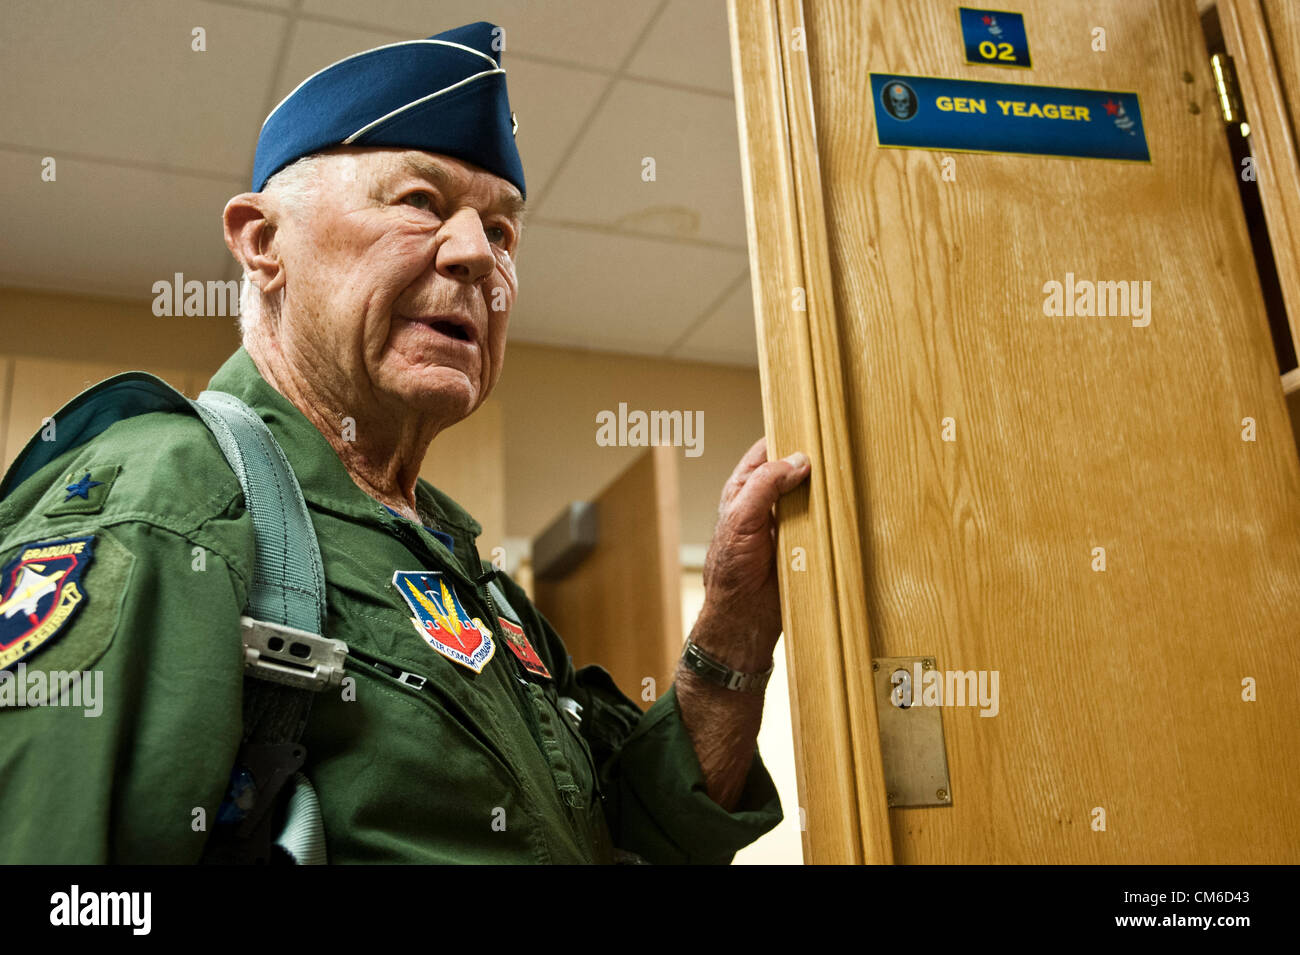 Retired United States Air Force Brig. Gen. Chuck Yeager, 89, before boarding a F-15D Eagle fighter aircraft to celebrate the 65th anniversary of becoming the first person to break the sound barrier October 14, 2012, at Nellis Air Force Base, Nevada. In 1947 Yeager broke the sound barrier in a Bell XS-1 rocket research plane named Glamorous Glennis. Stock Photo